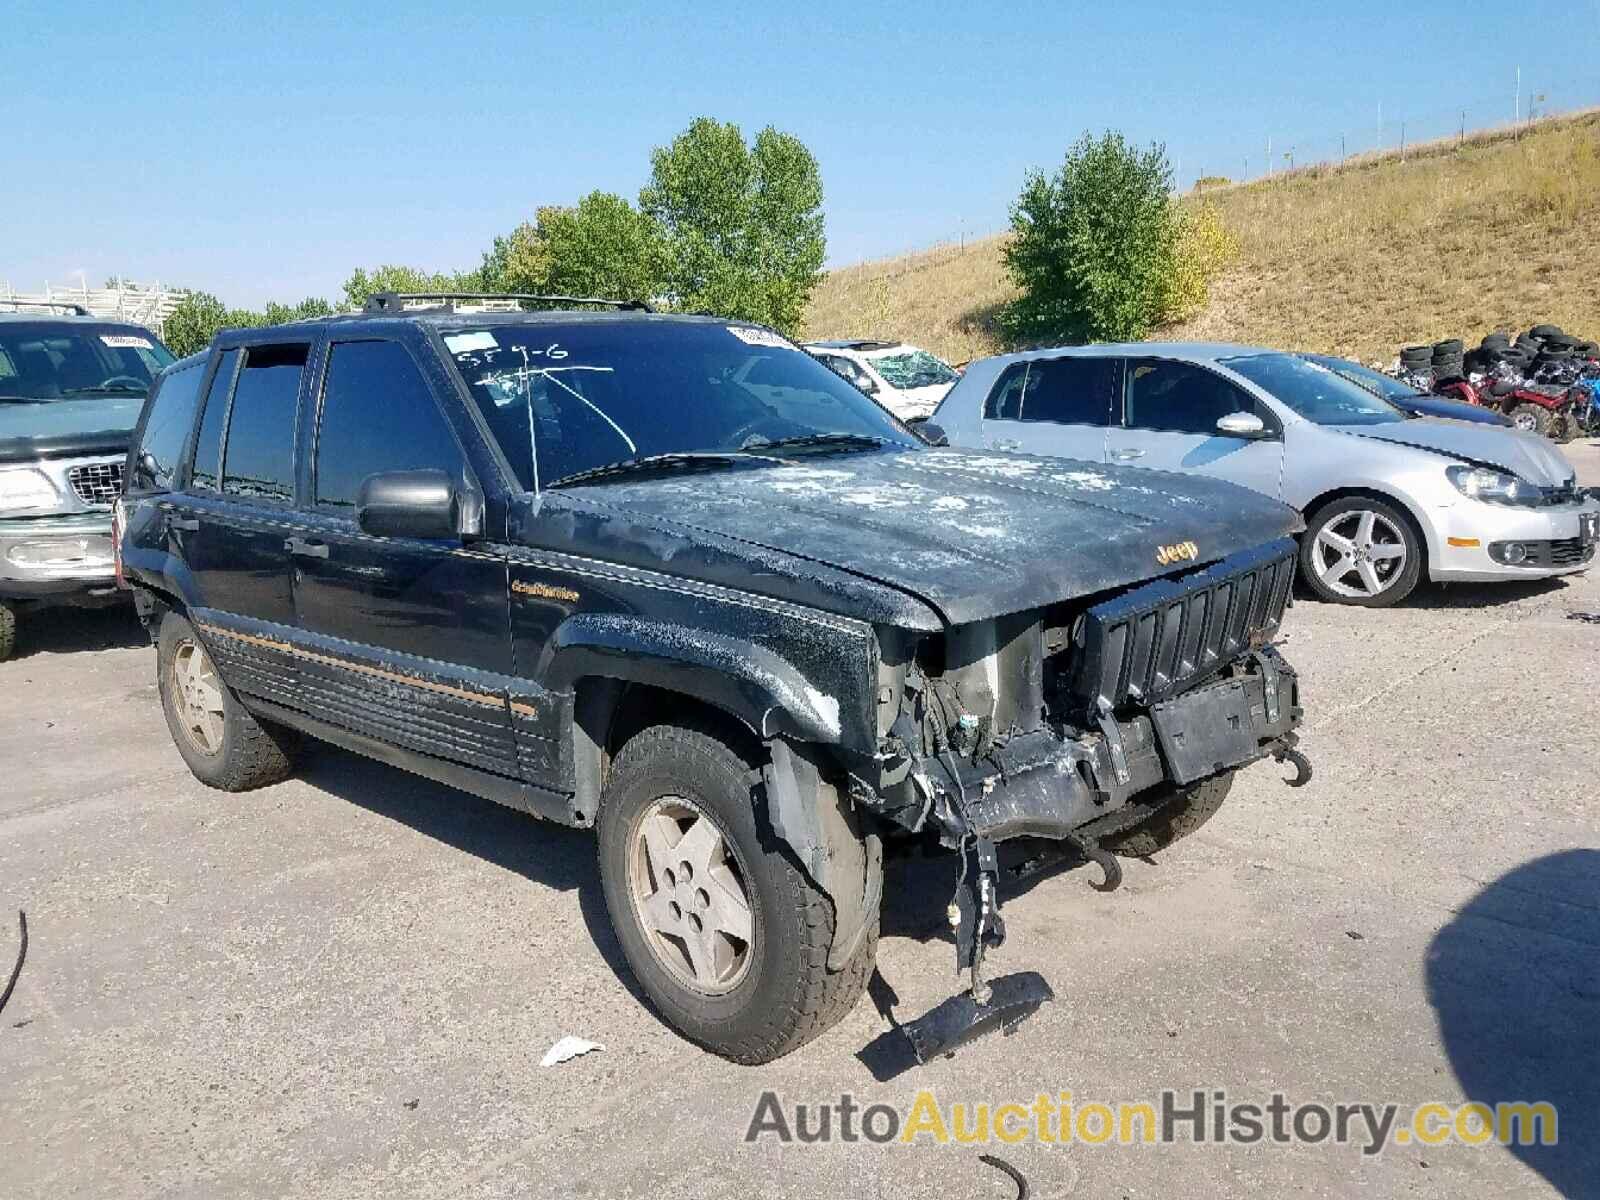 1993 JEEP CHEROKEE LIMITED, 1J4GZ78Y7PC536146